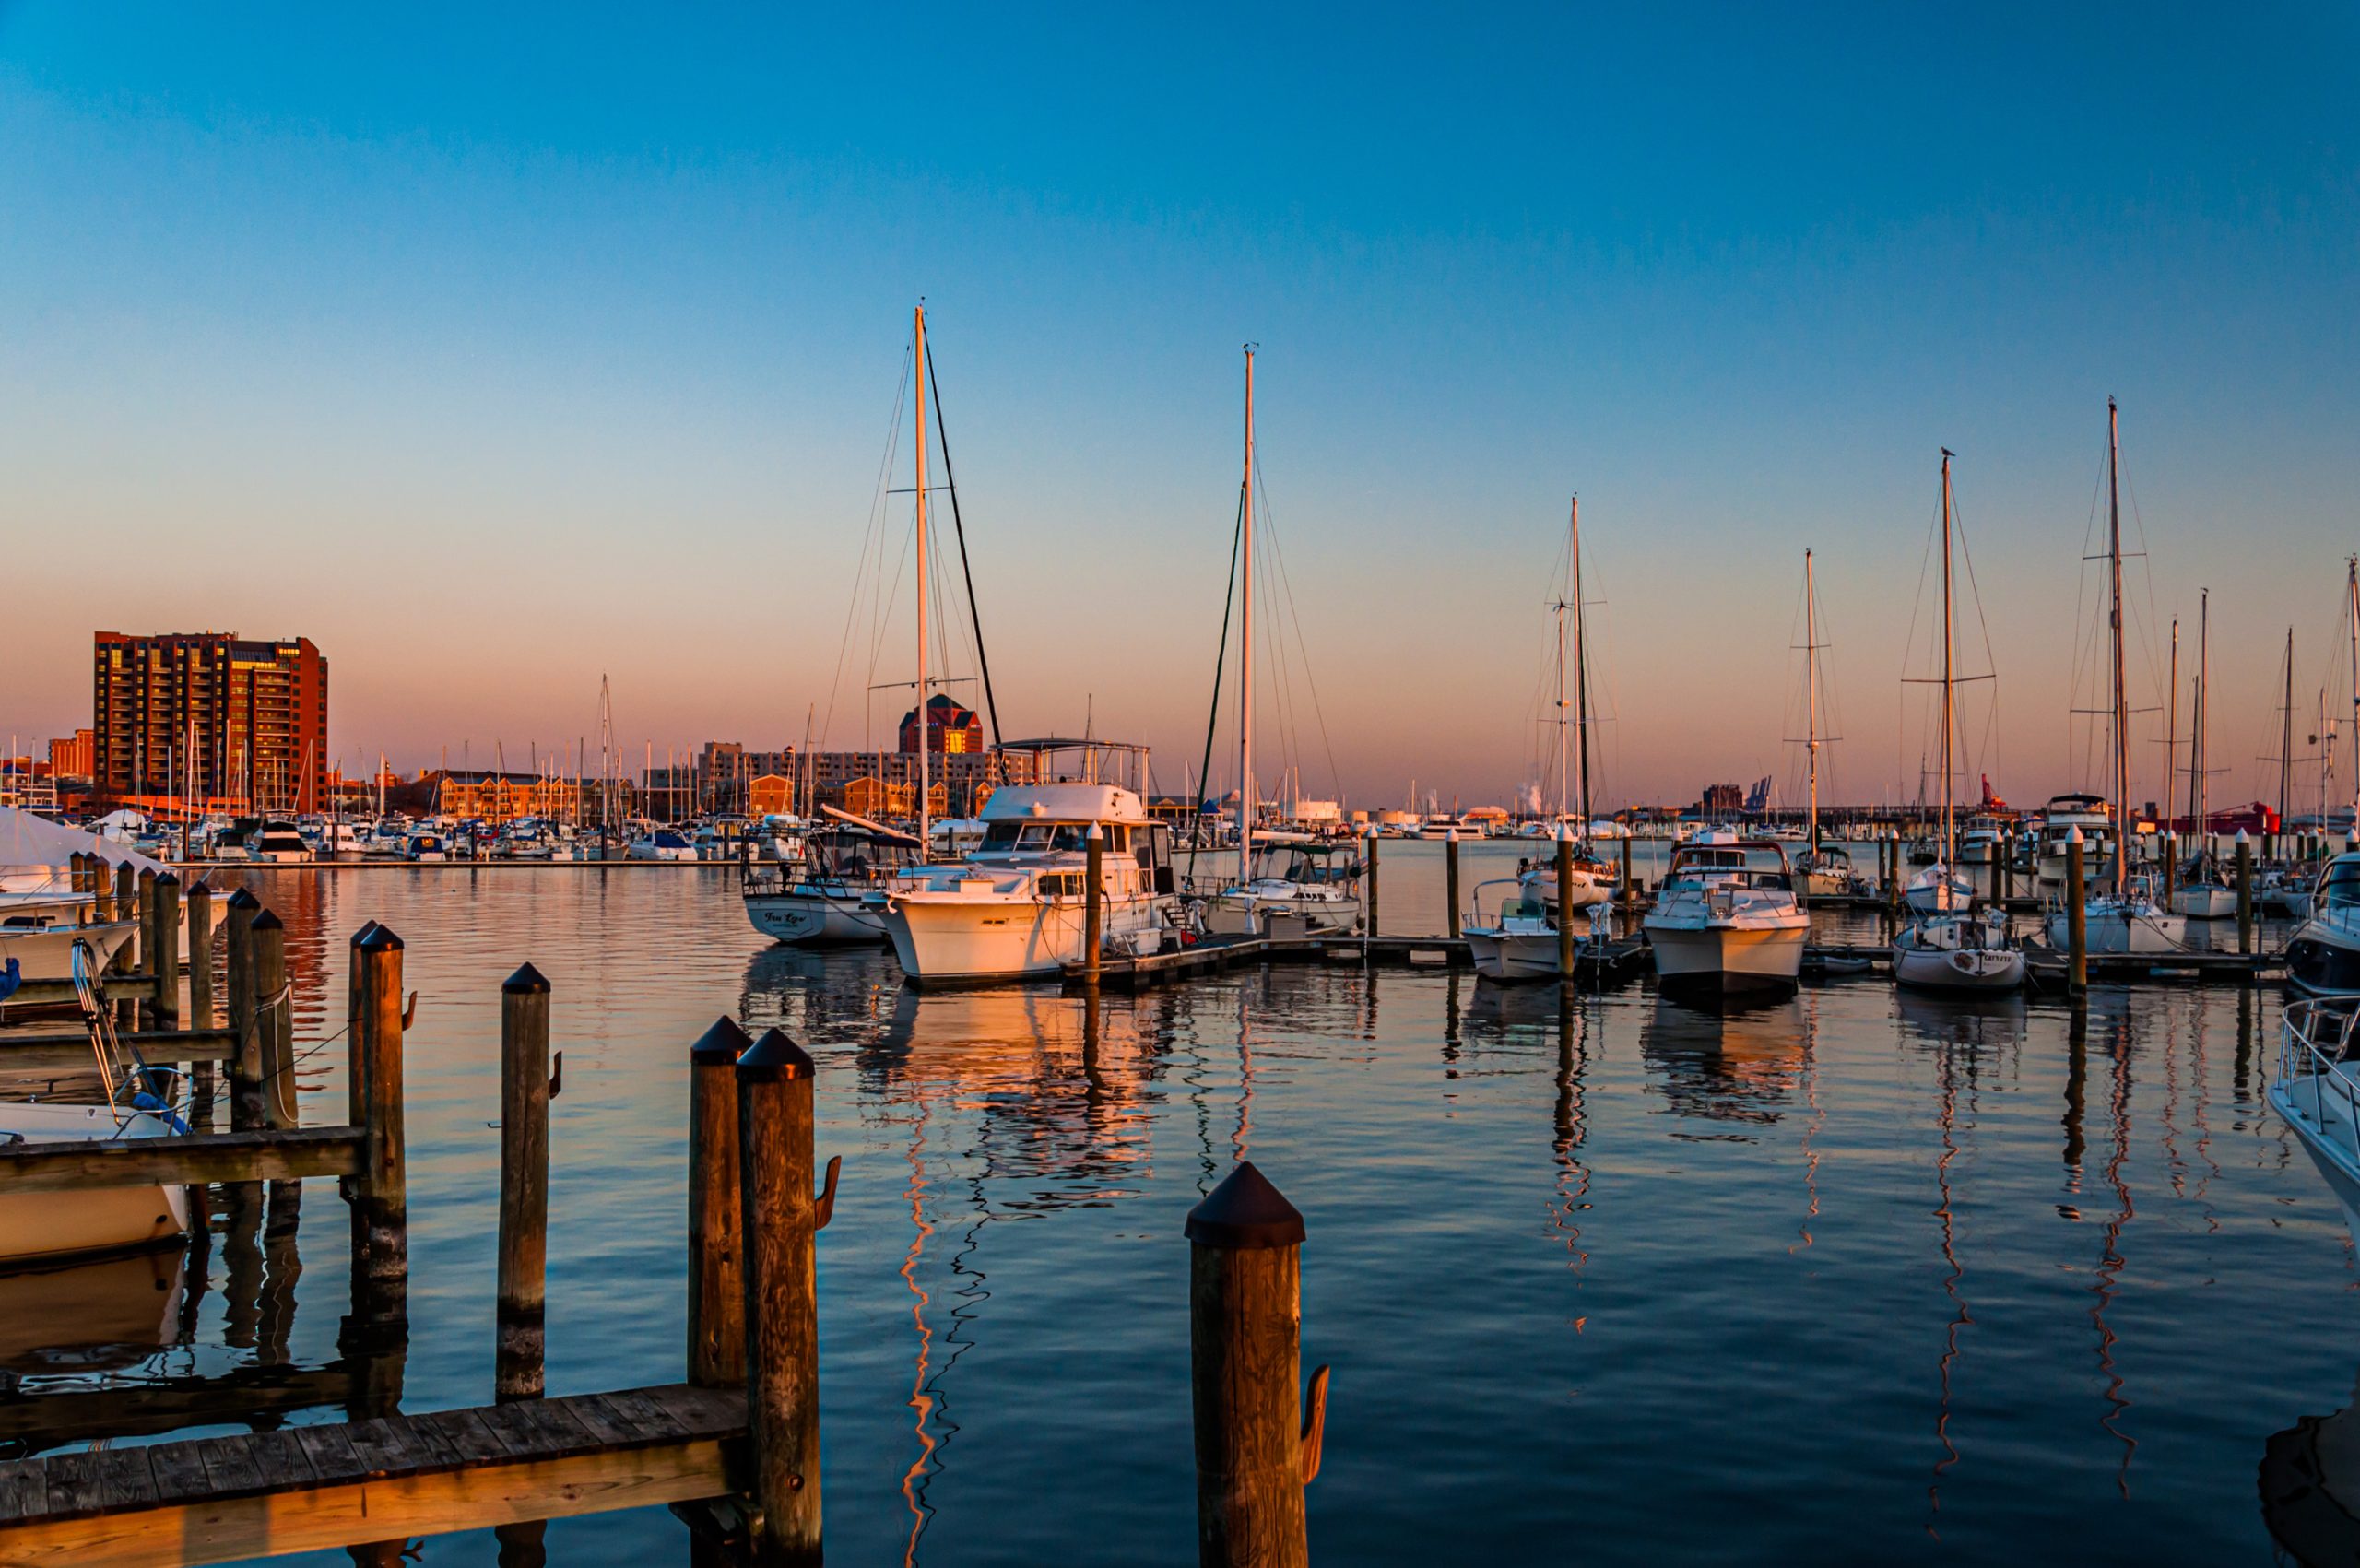 sunset Fells Point, MD - detox in Fells Point, MD concept service area